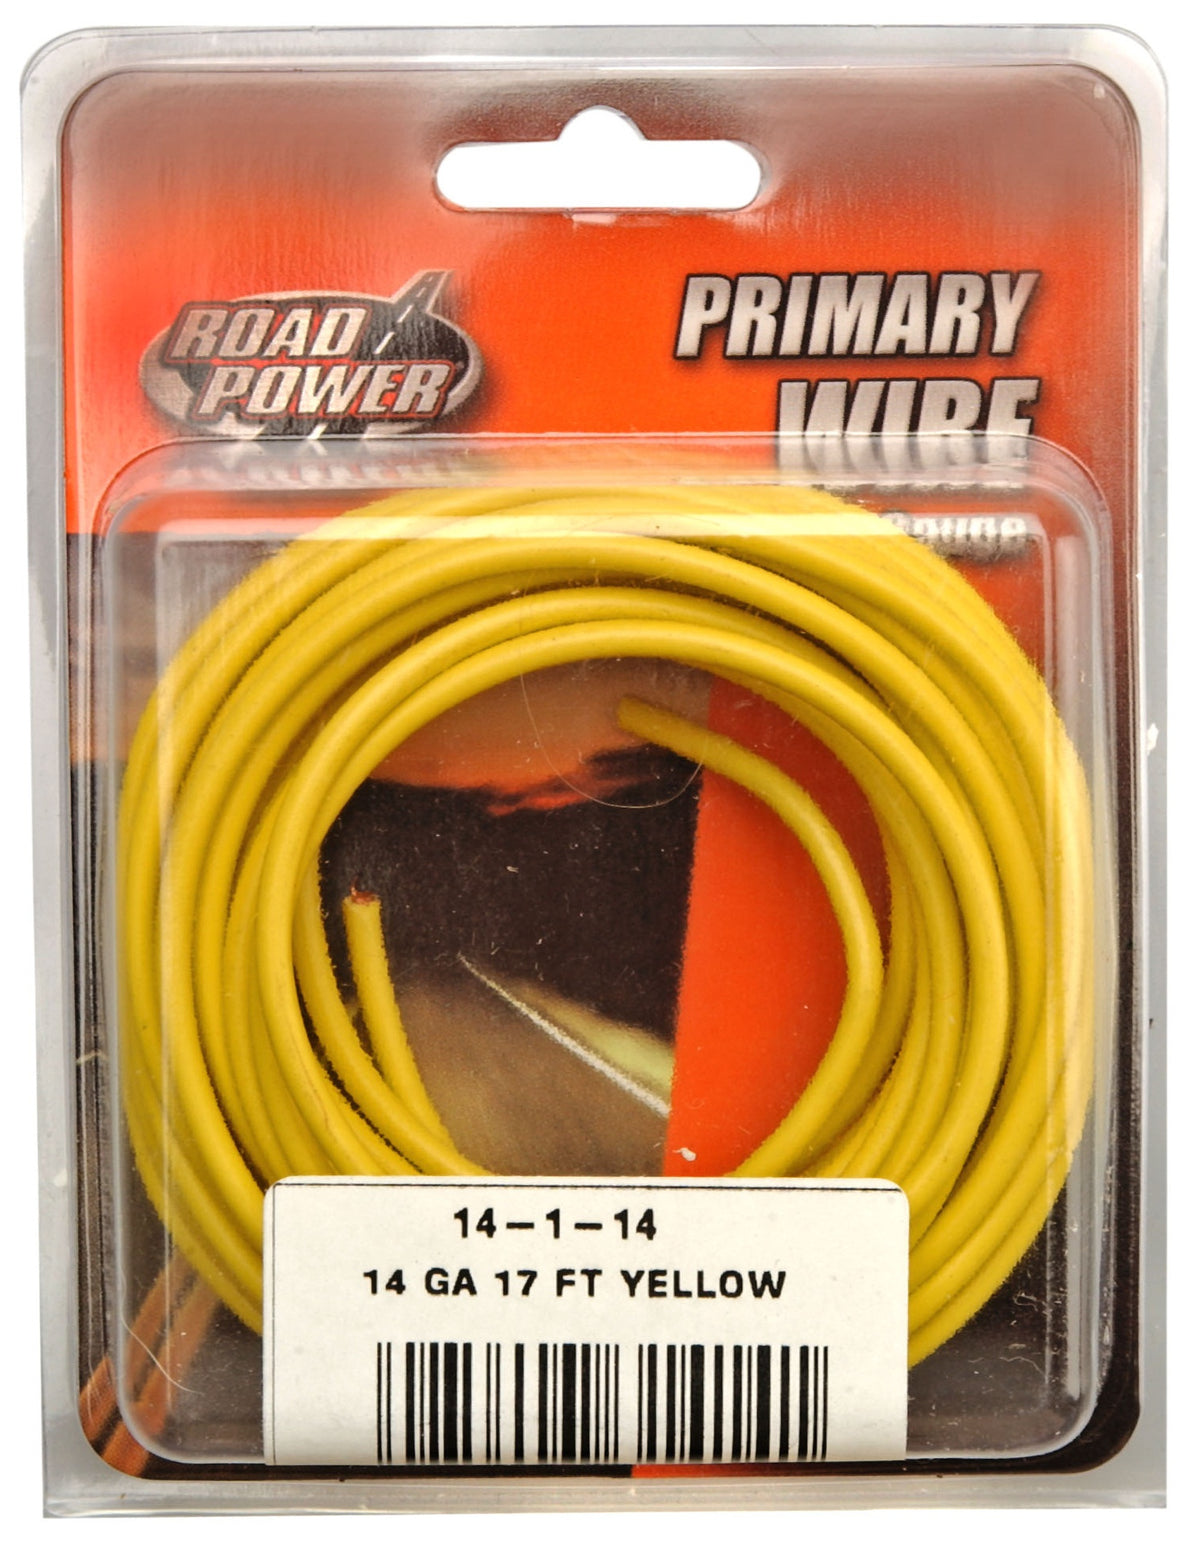 Road Power 55670833 Primary Electrical Wire, 14 Gauge, 17', Yellow